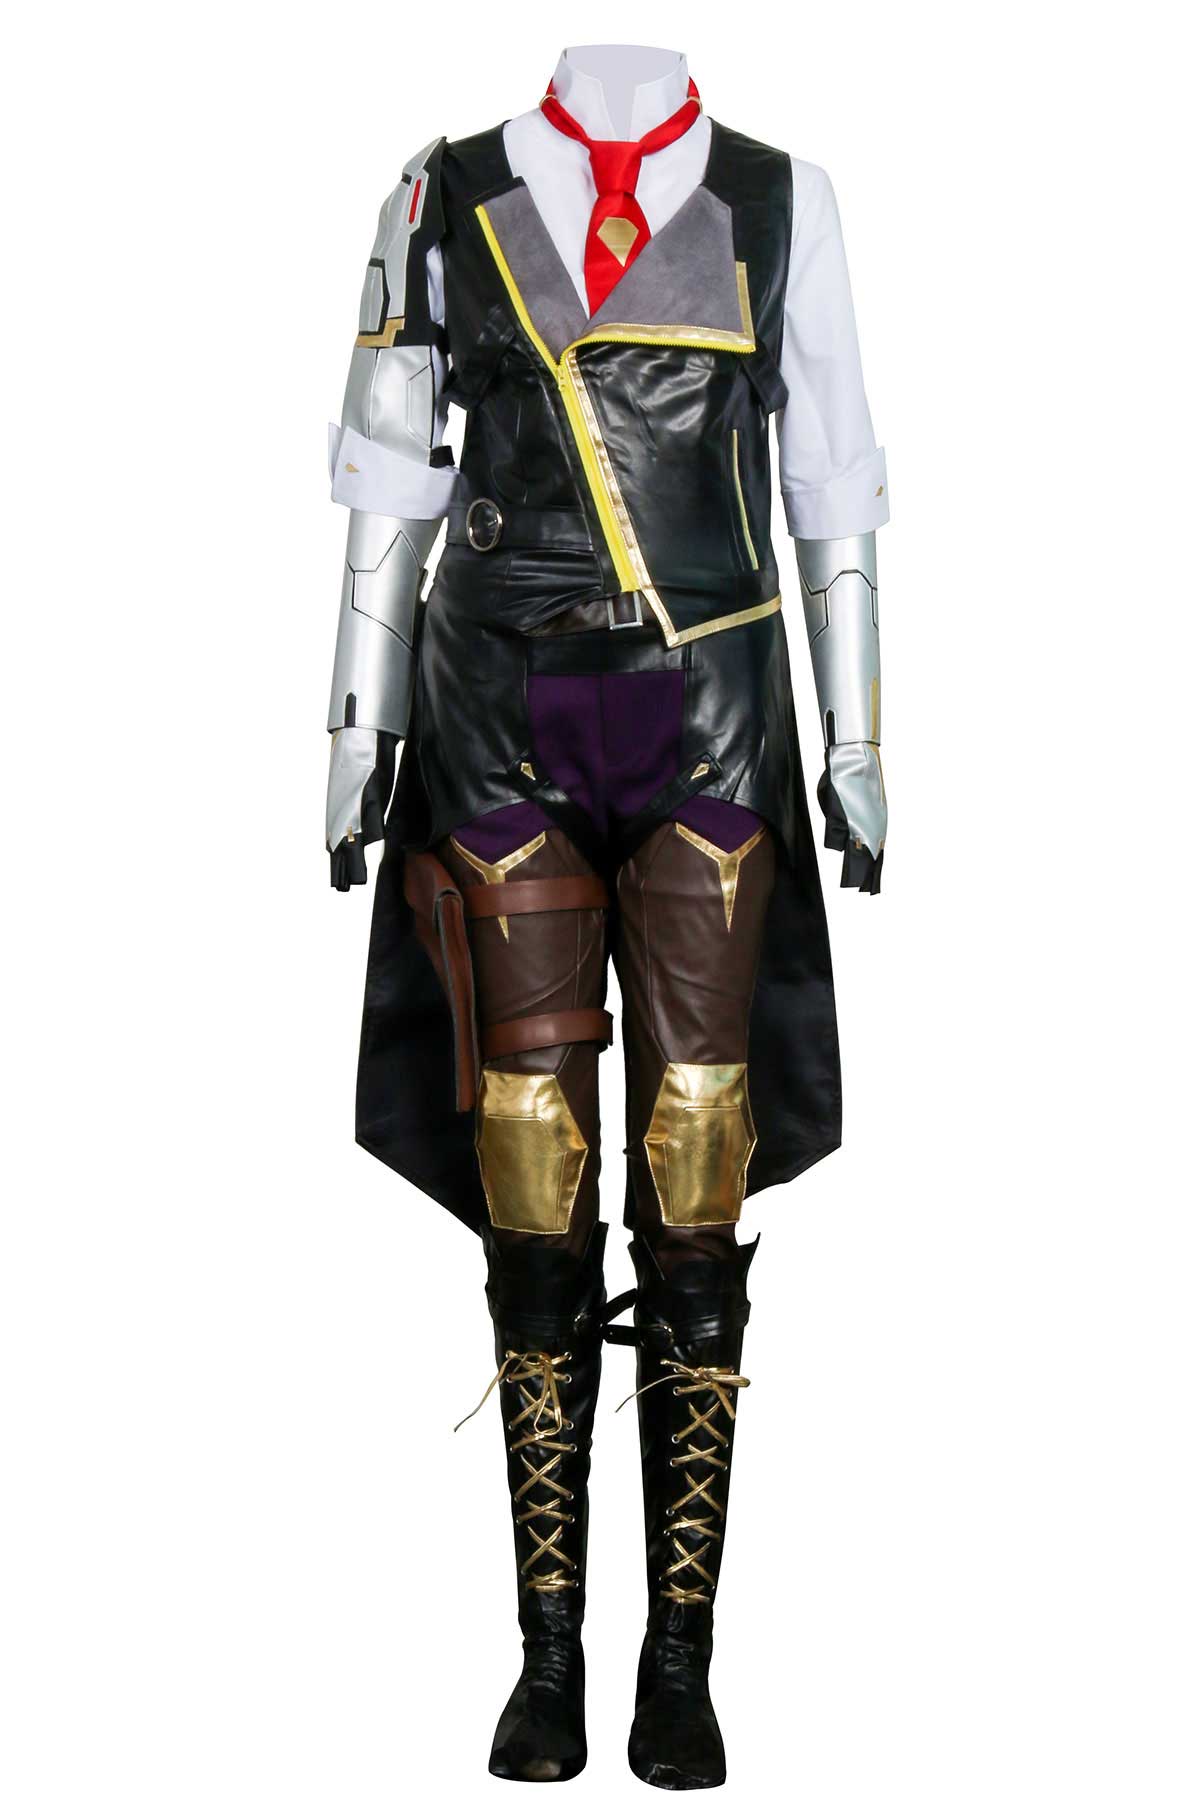 Overwatch OW The Vipper Ashe Elizabeth Caledonia Hero Outfit Cosplay Costume Fullset